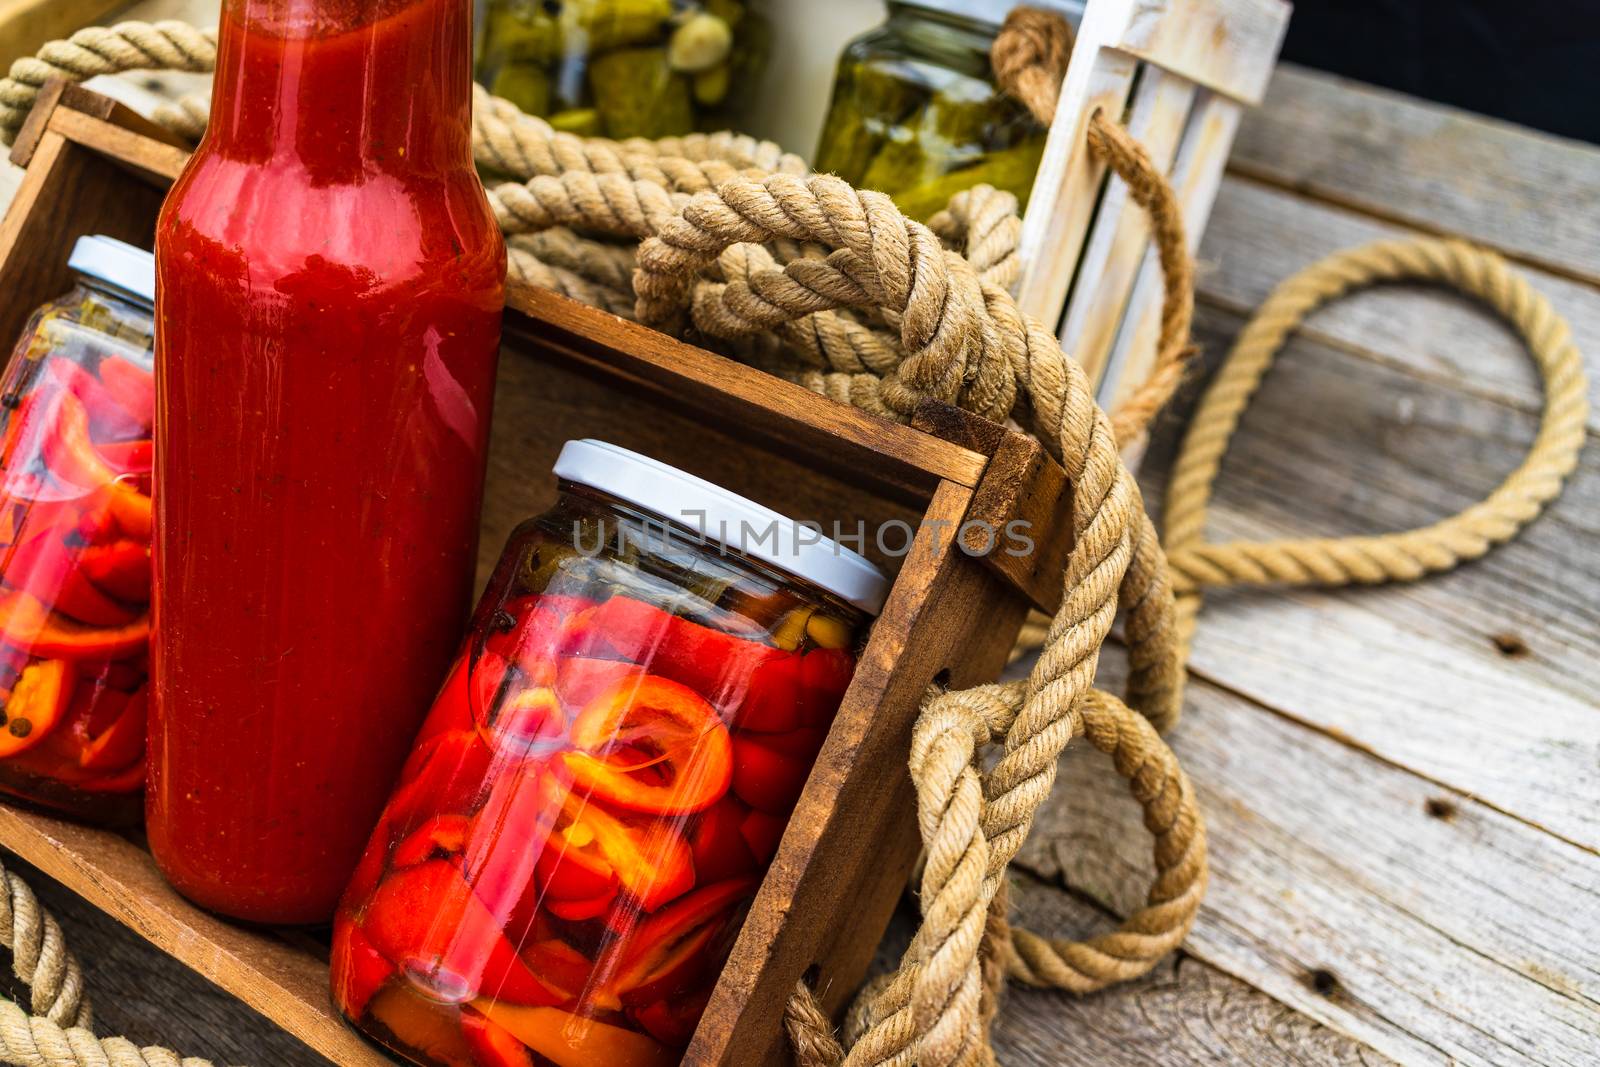 Wooden crate with bottles with tomatoes sauce and glass jars with pickled red bell peppers isolated in a rustic composition. Jars with variety of pickled vegetables preserved food concept.